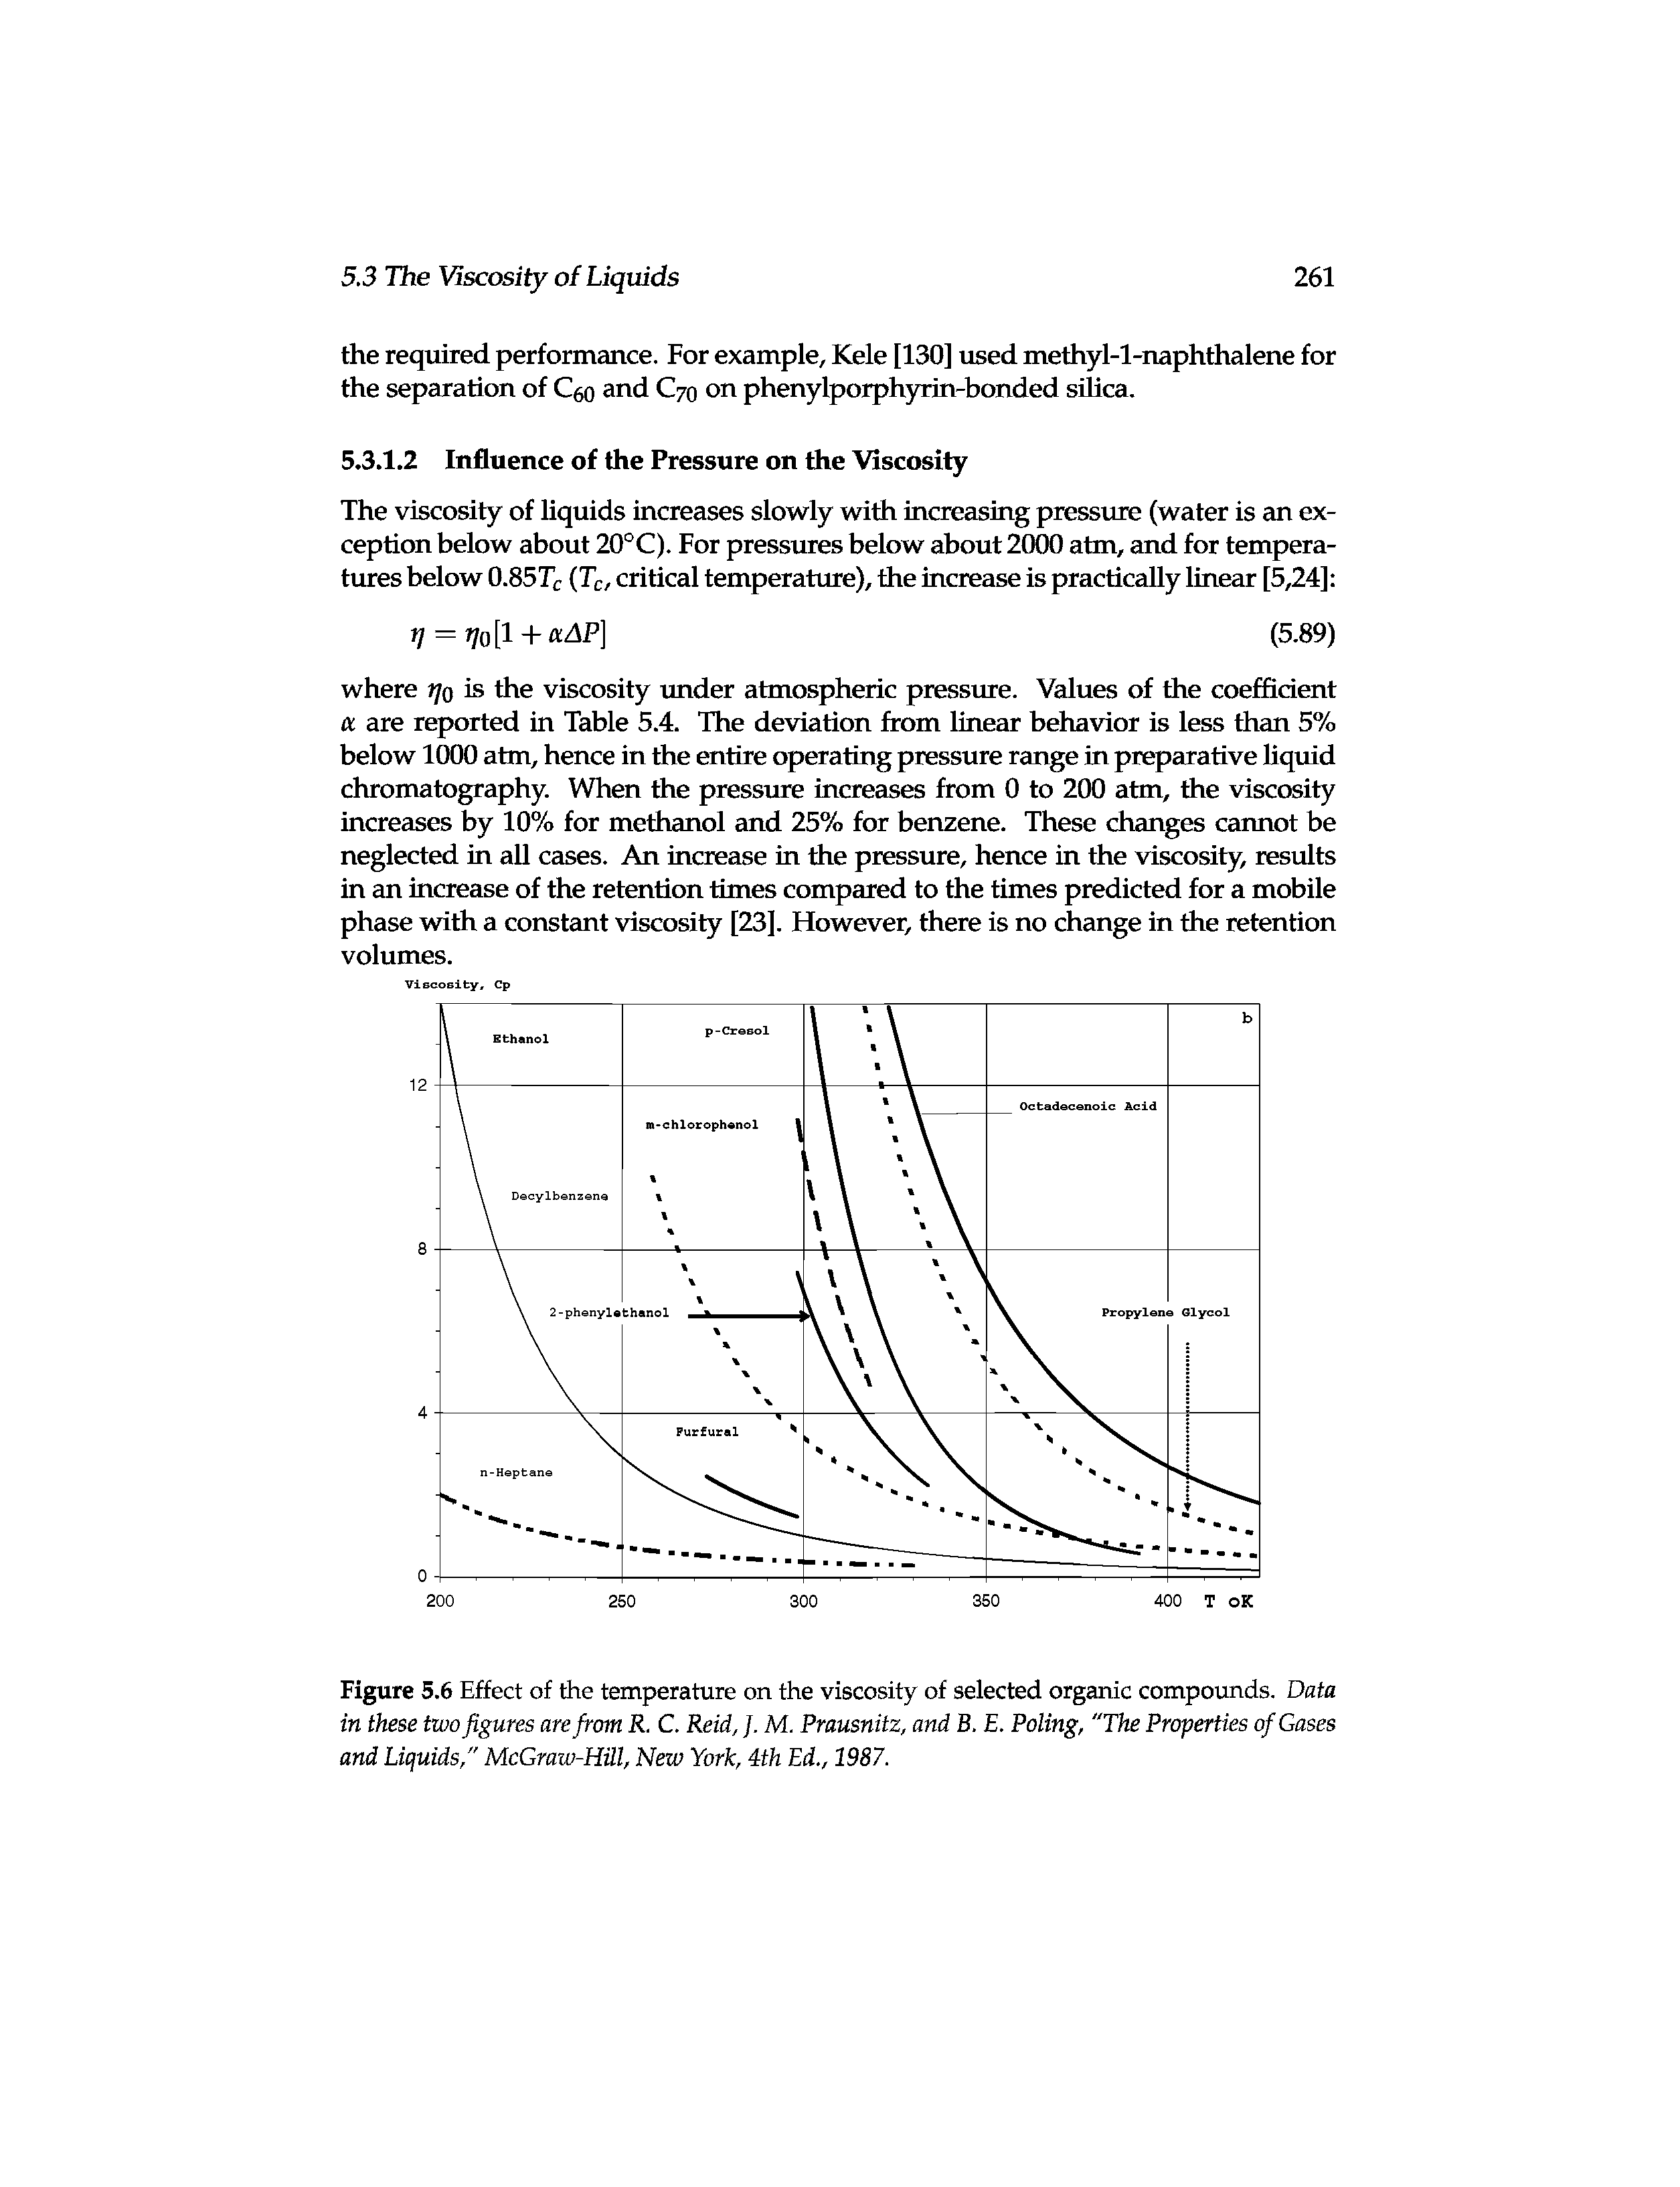 Figure 5.6 Effect of the temperature on the viscosity of selected organic compounds. Data in these two figures are from R. C. Reid, J. M. Prausnitz, and B. E. Poling, "The Properties of Gases and Liquids," McGraw-Hill, New York, 4th Ed., 1987.